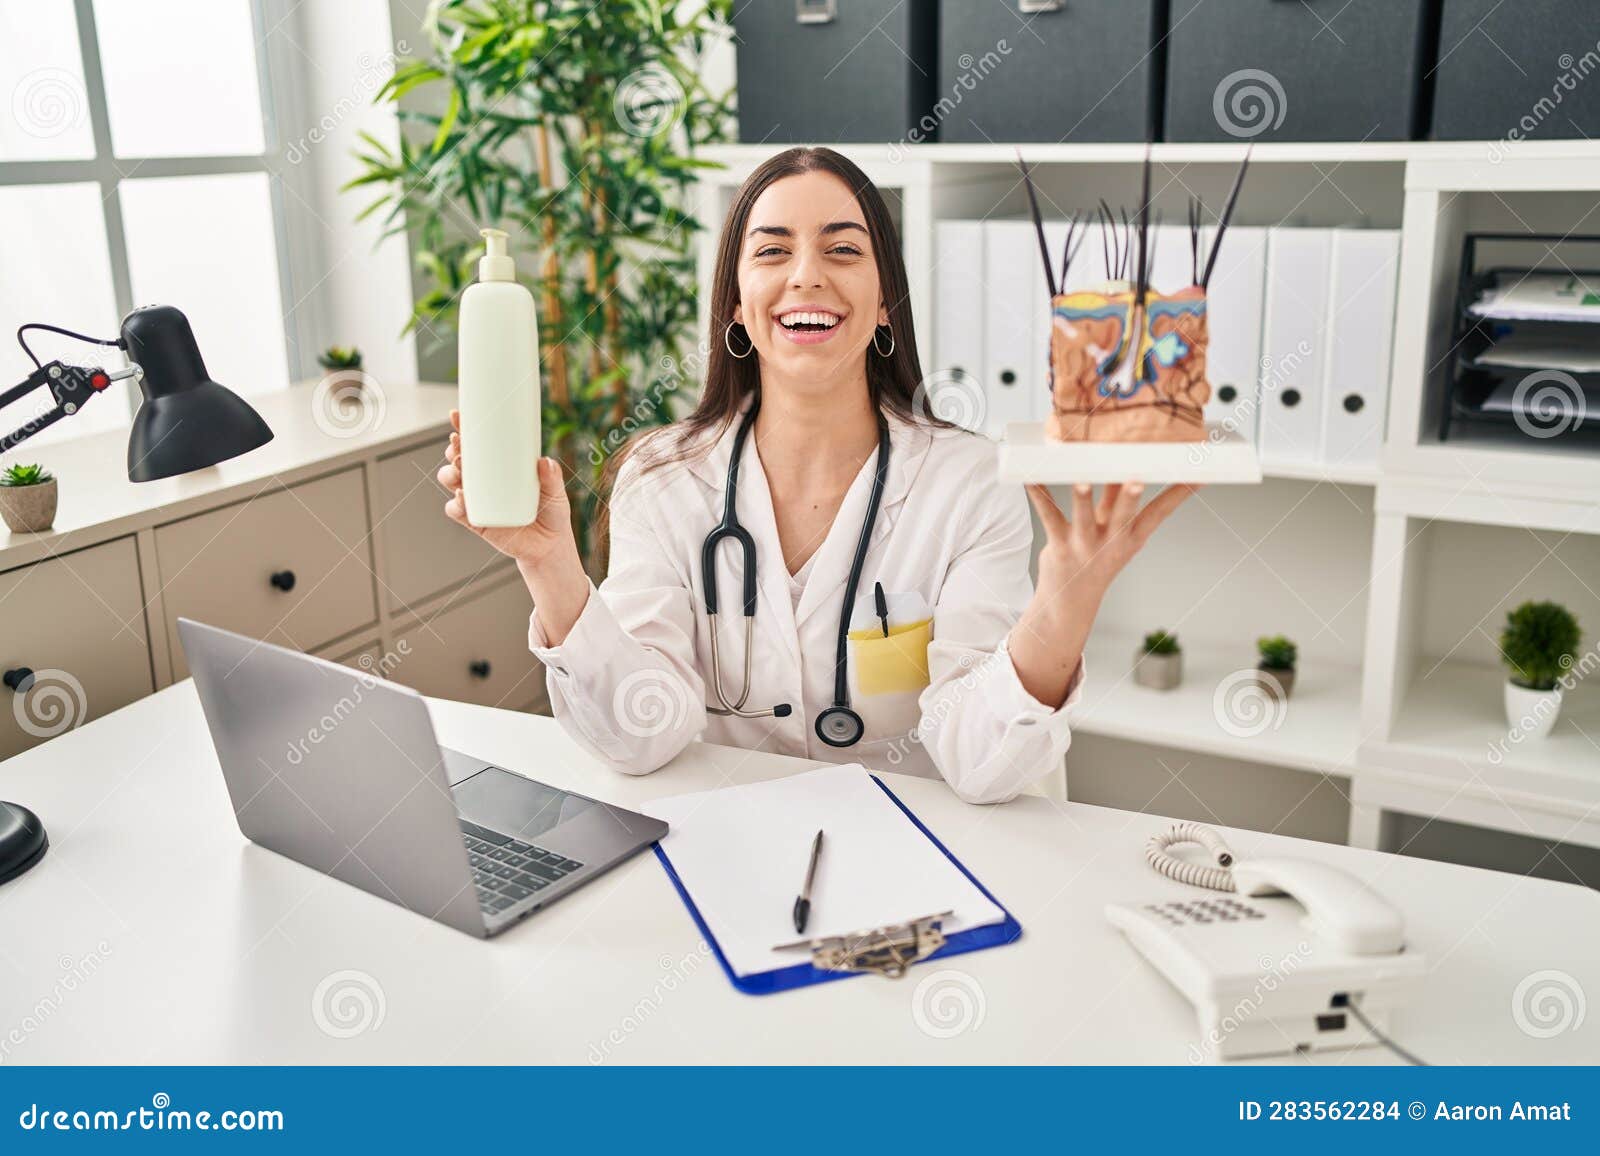 hispanic doctor woman holding model of human anatomical skin and hair smiling and laughing hard out loud because funny crazy joke